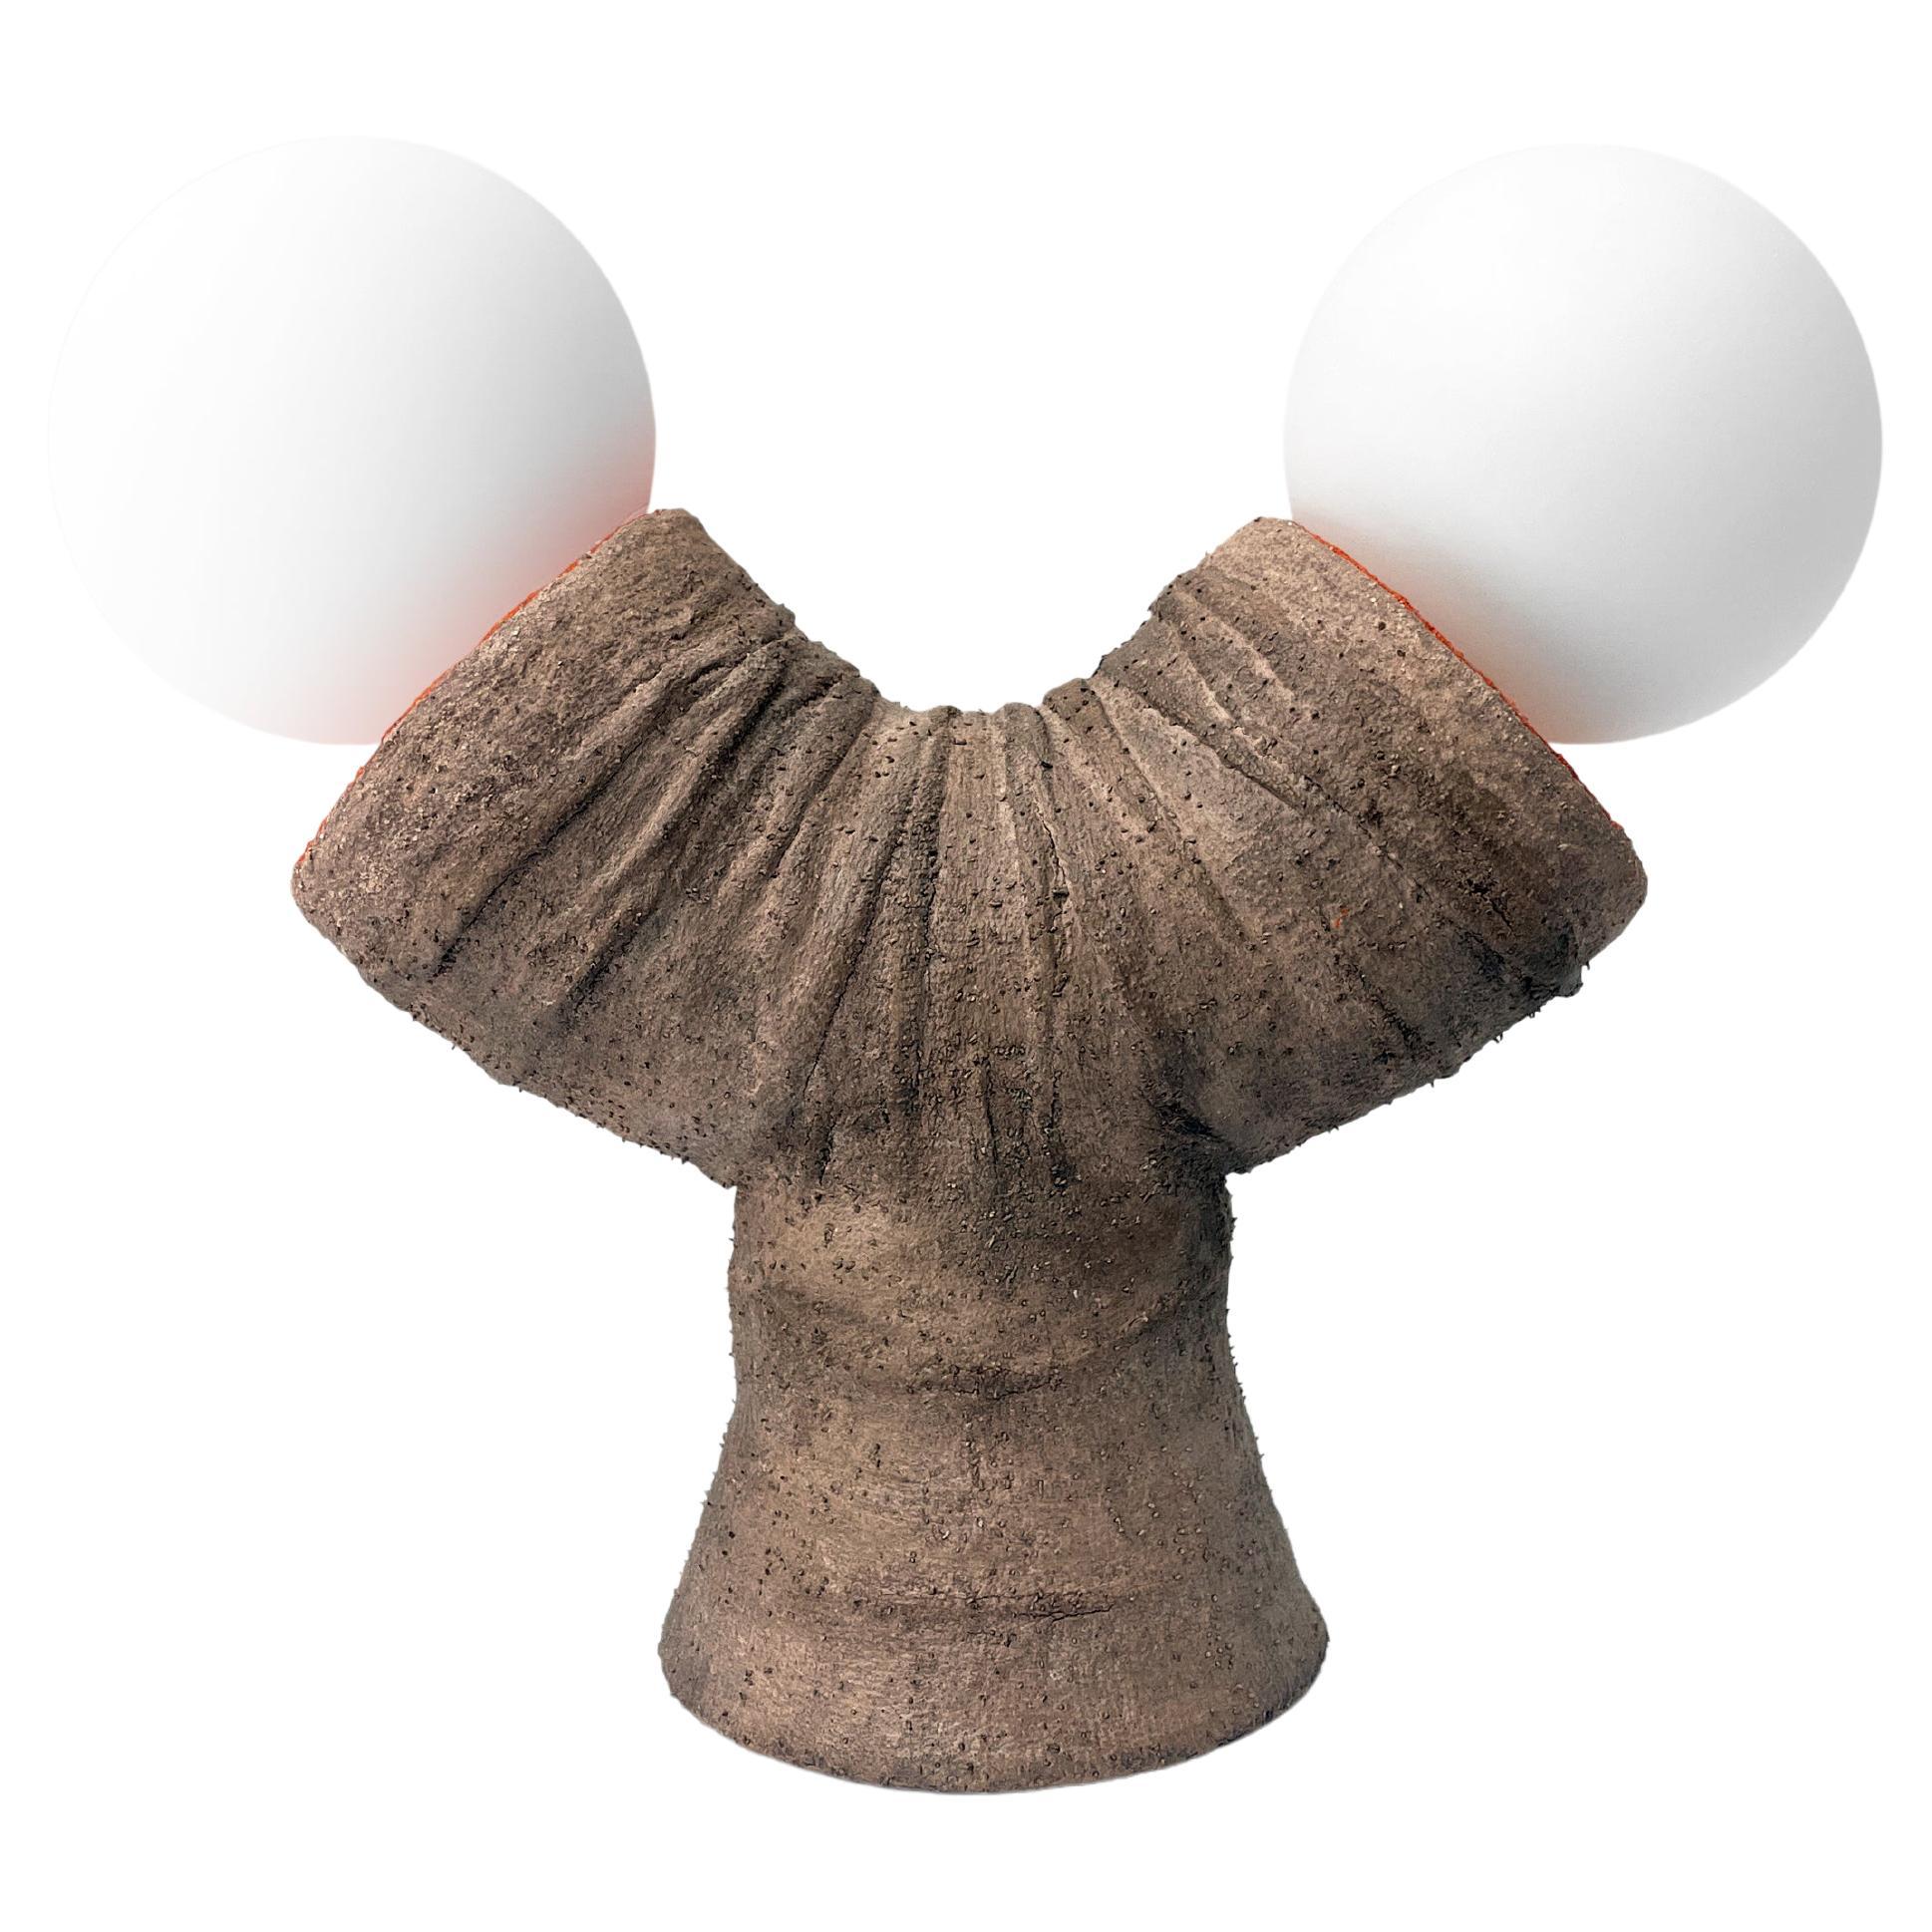 Contemporary Dimmable Table Lamp - "Totem" by Nicola Cecutti